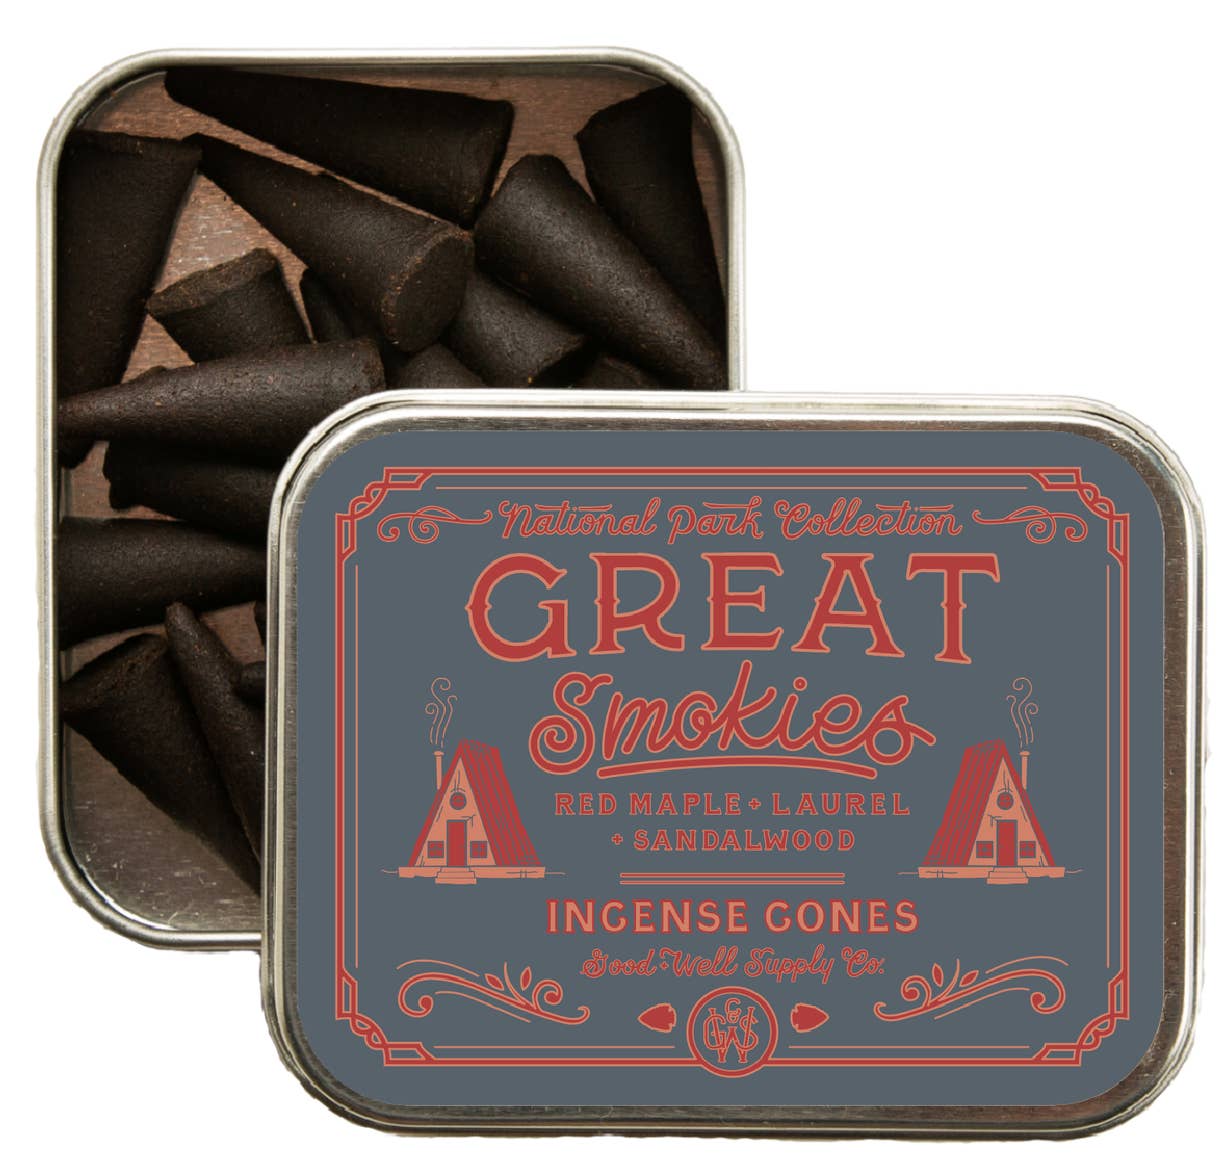 Good &amp; Well Supply Co Incense Cones